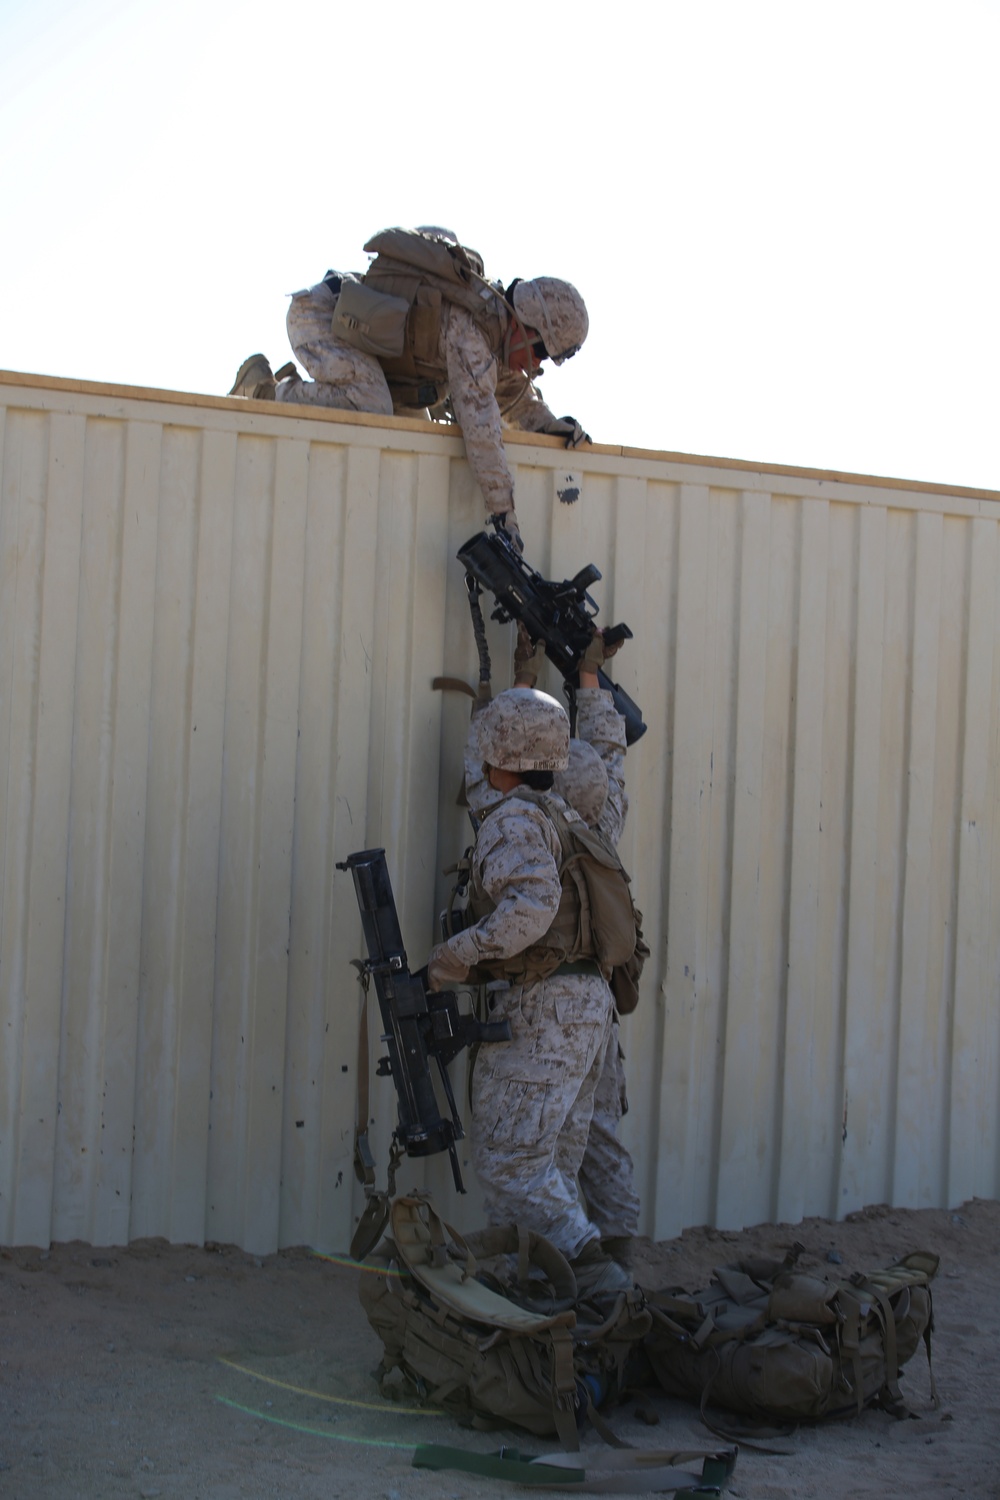 Integrated Task Force anti-armor Marines conduct MCOTEA assessment